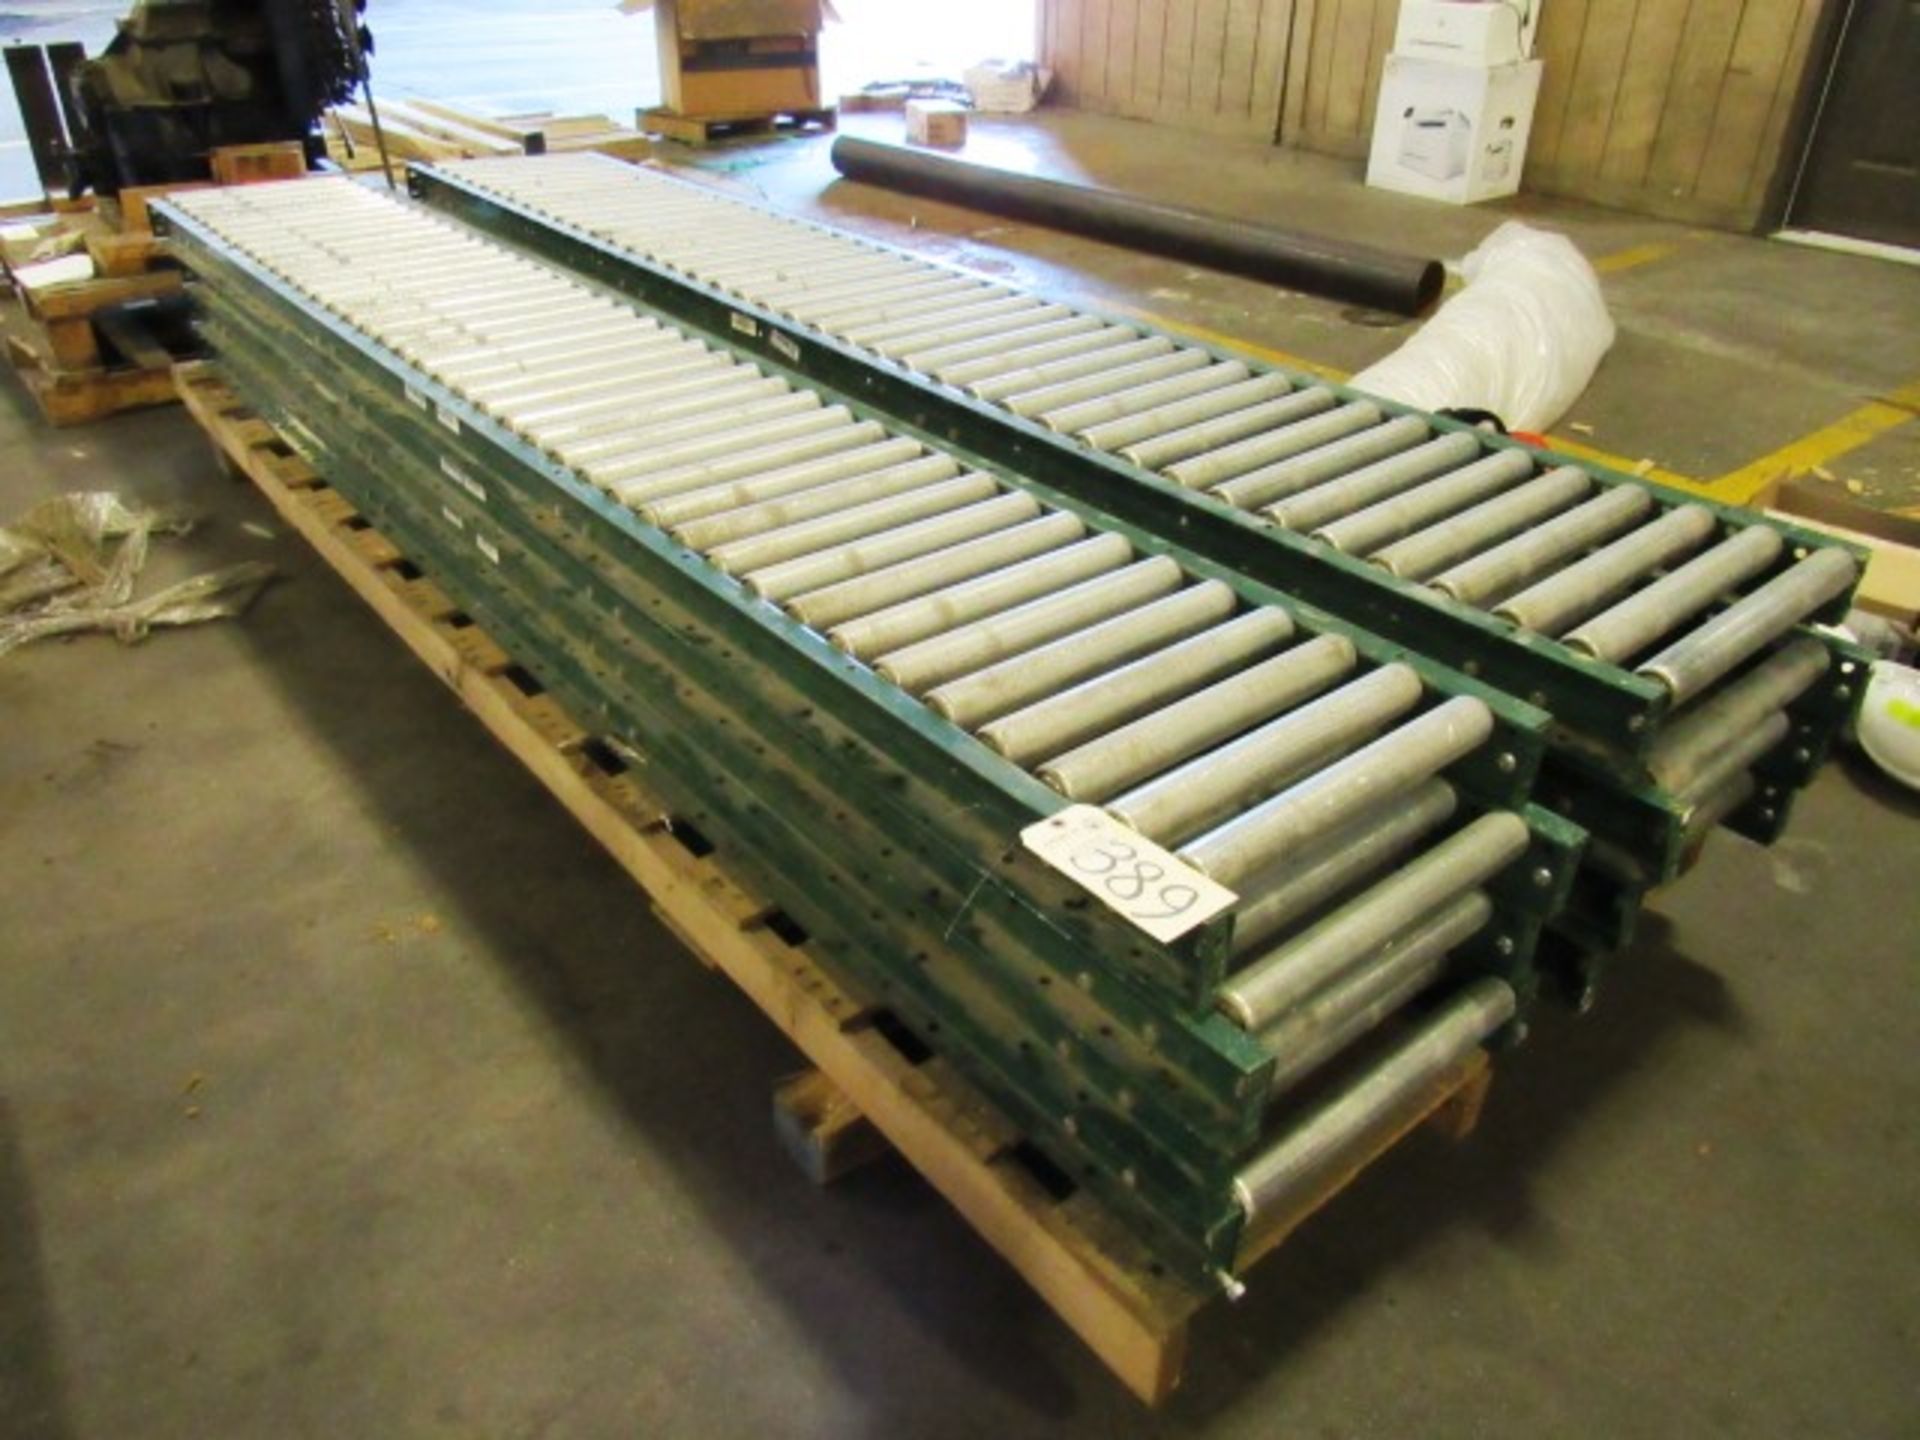 8 Sections of Parts Conveyors